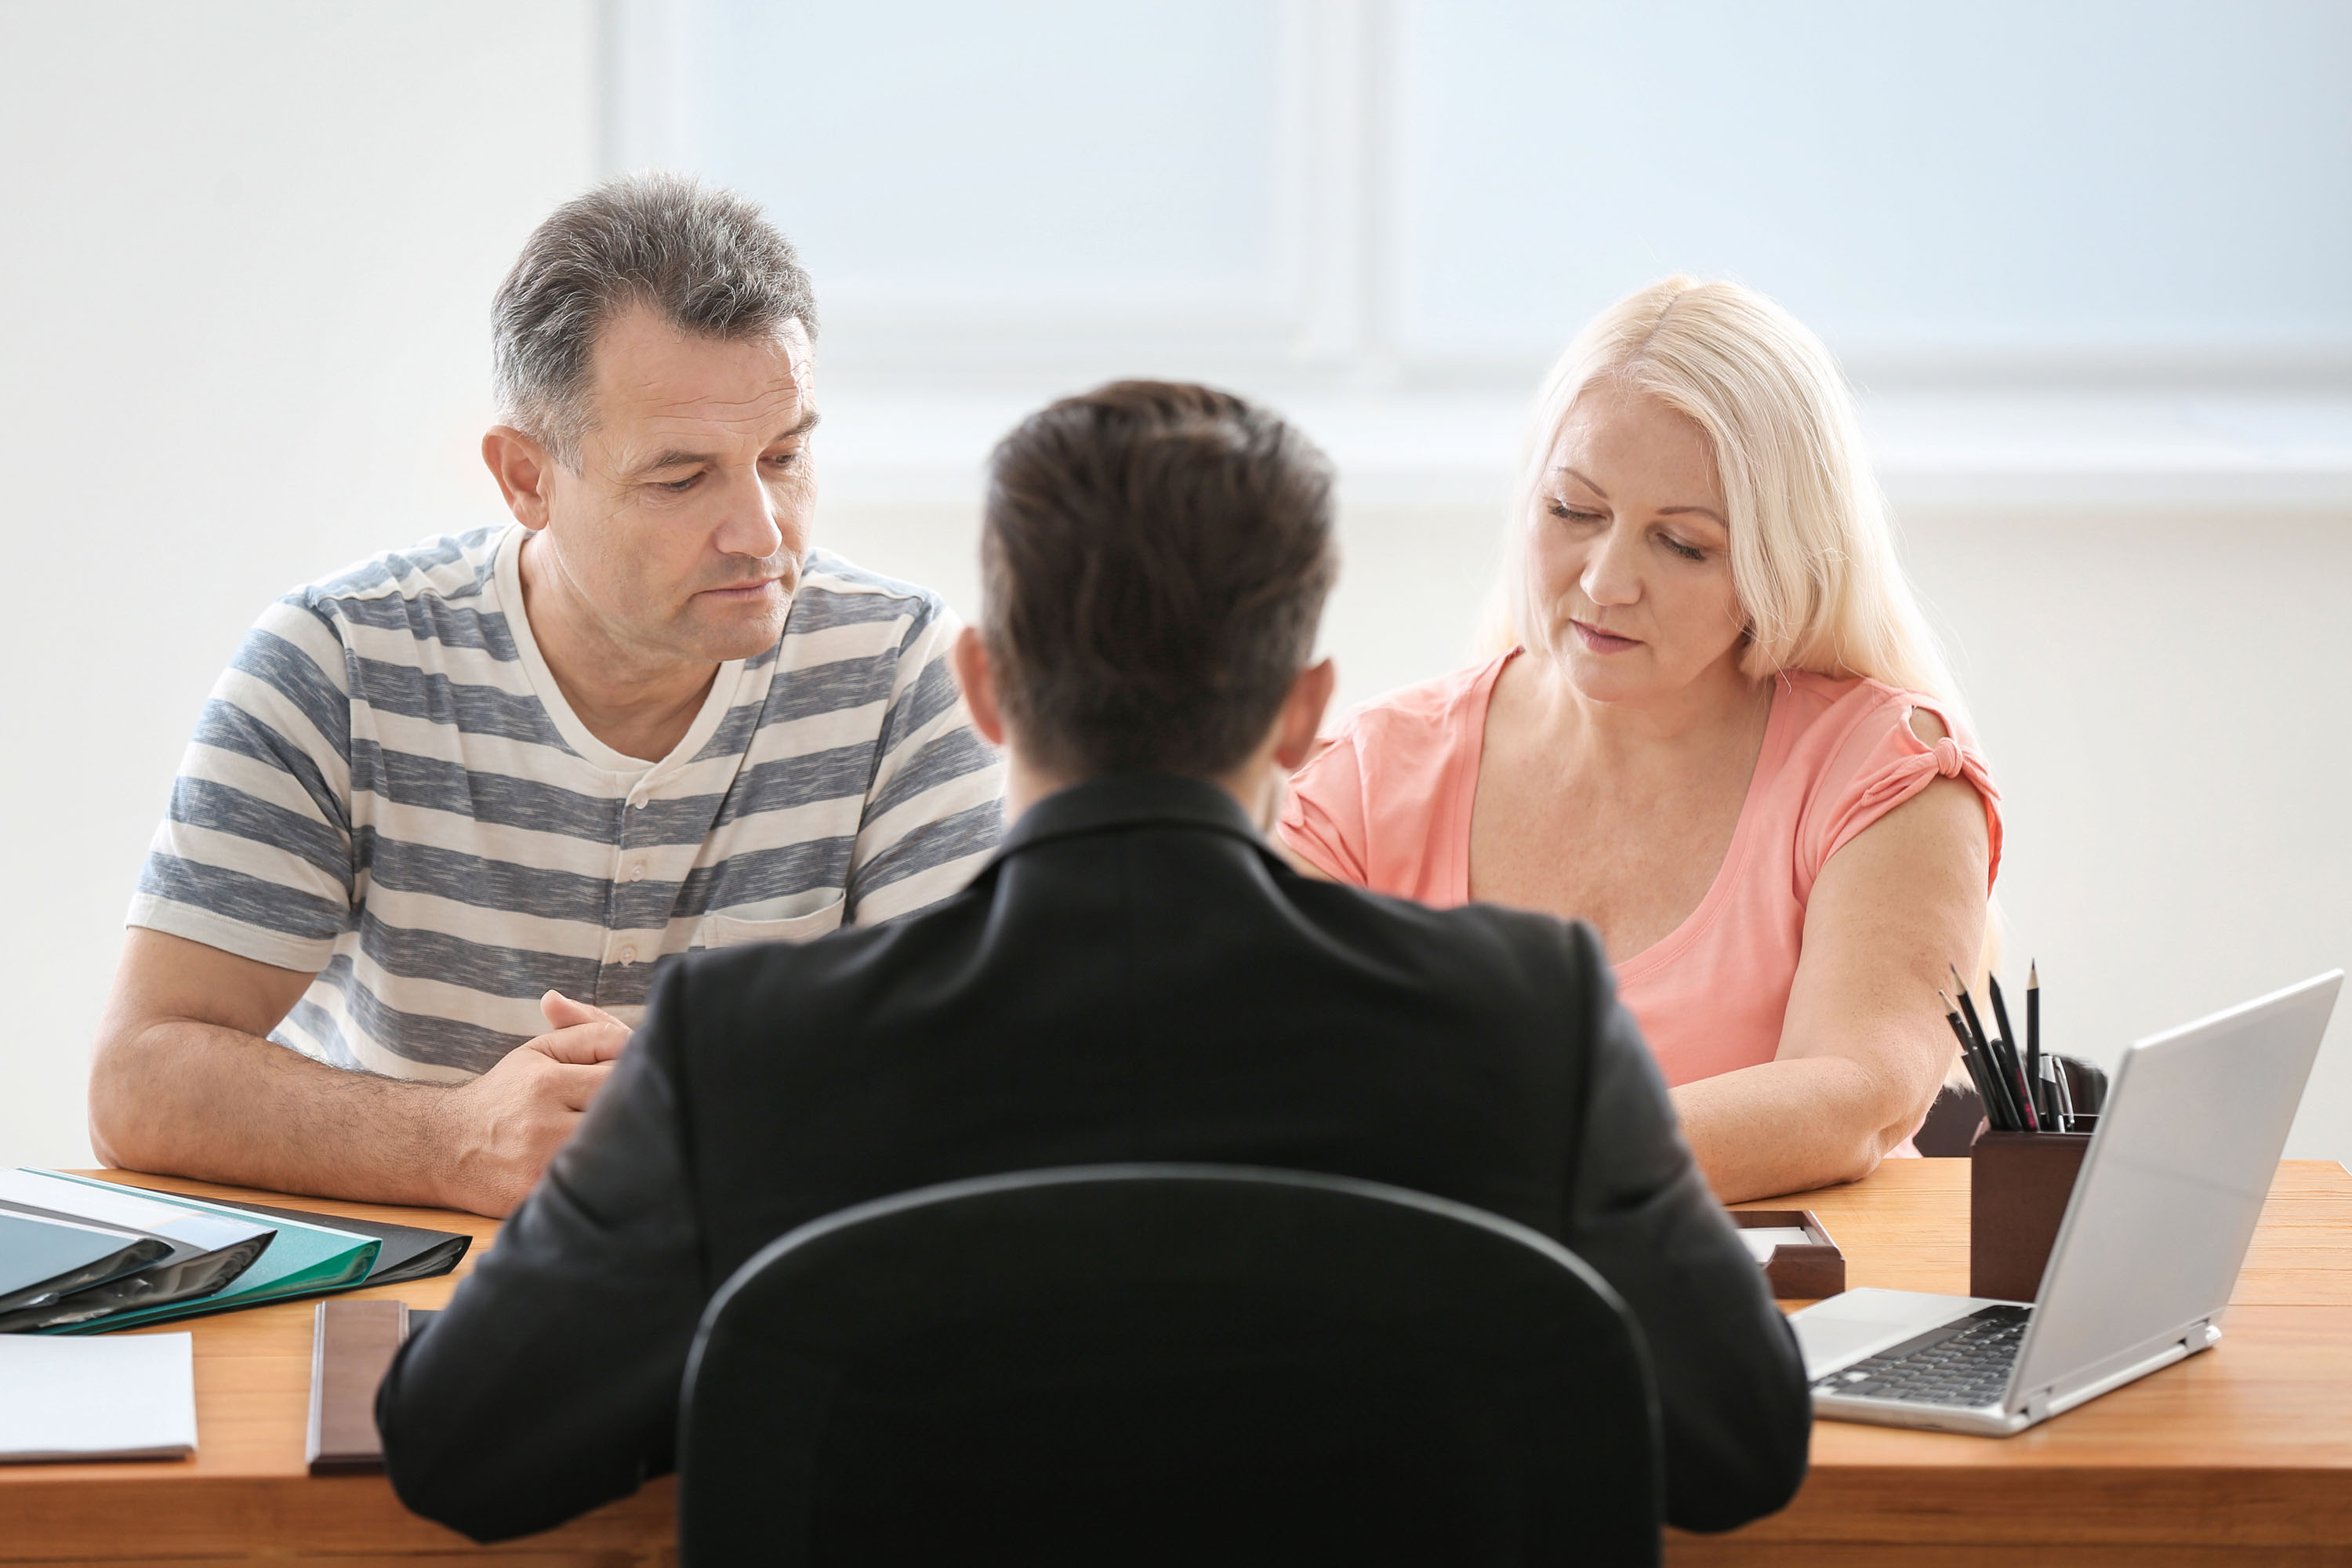 Is your power of attorney for property powerful enough?